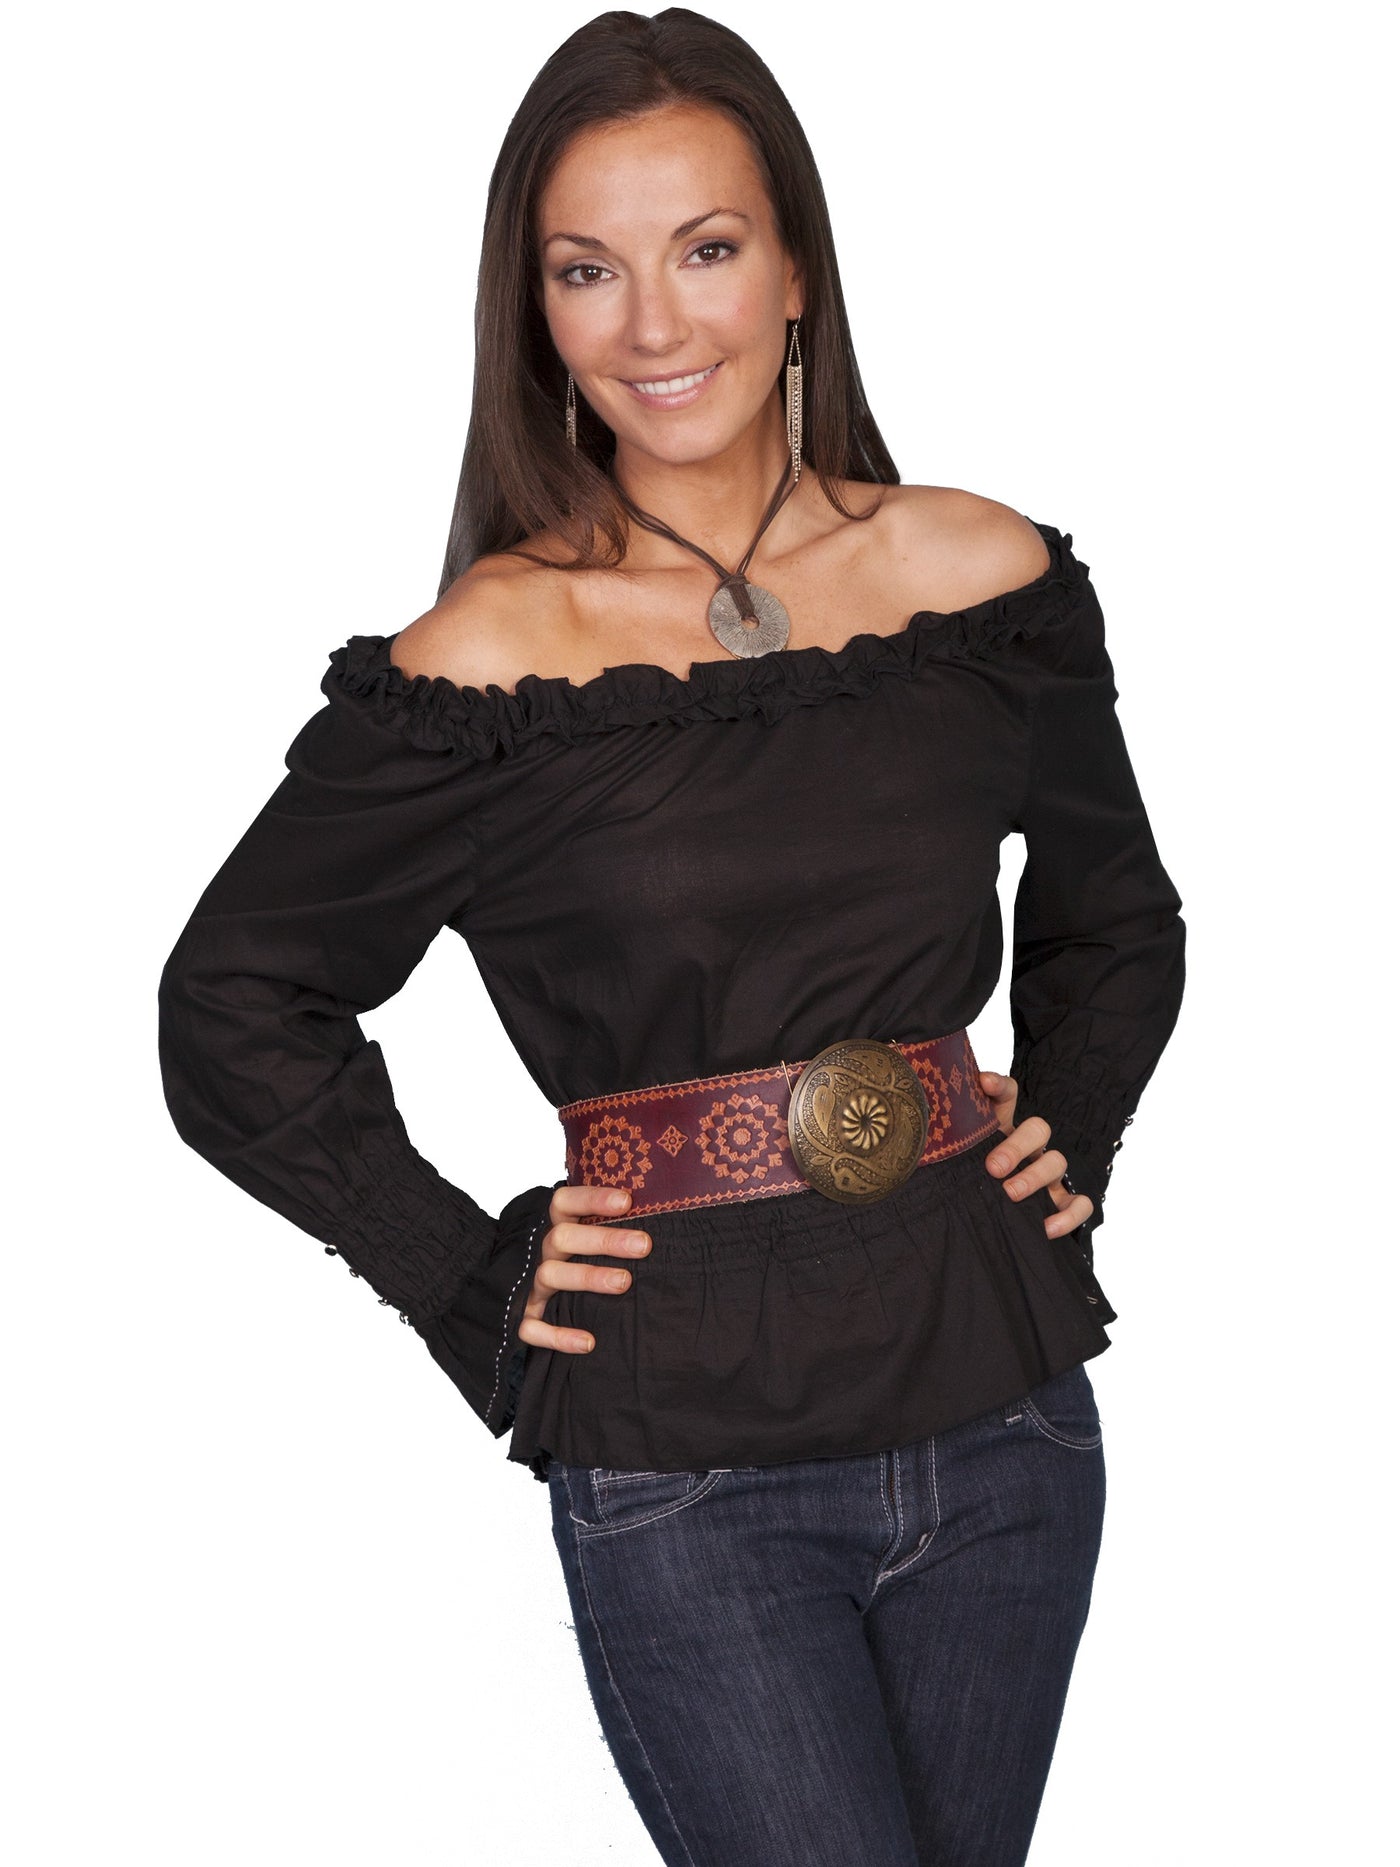 Ranch Style Romantic Peasant Blouse in Black - SOLD OUT